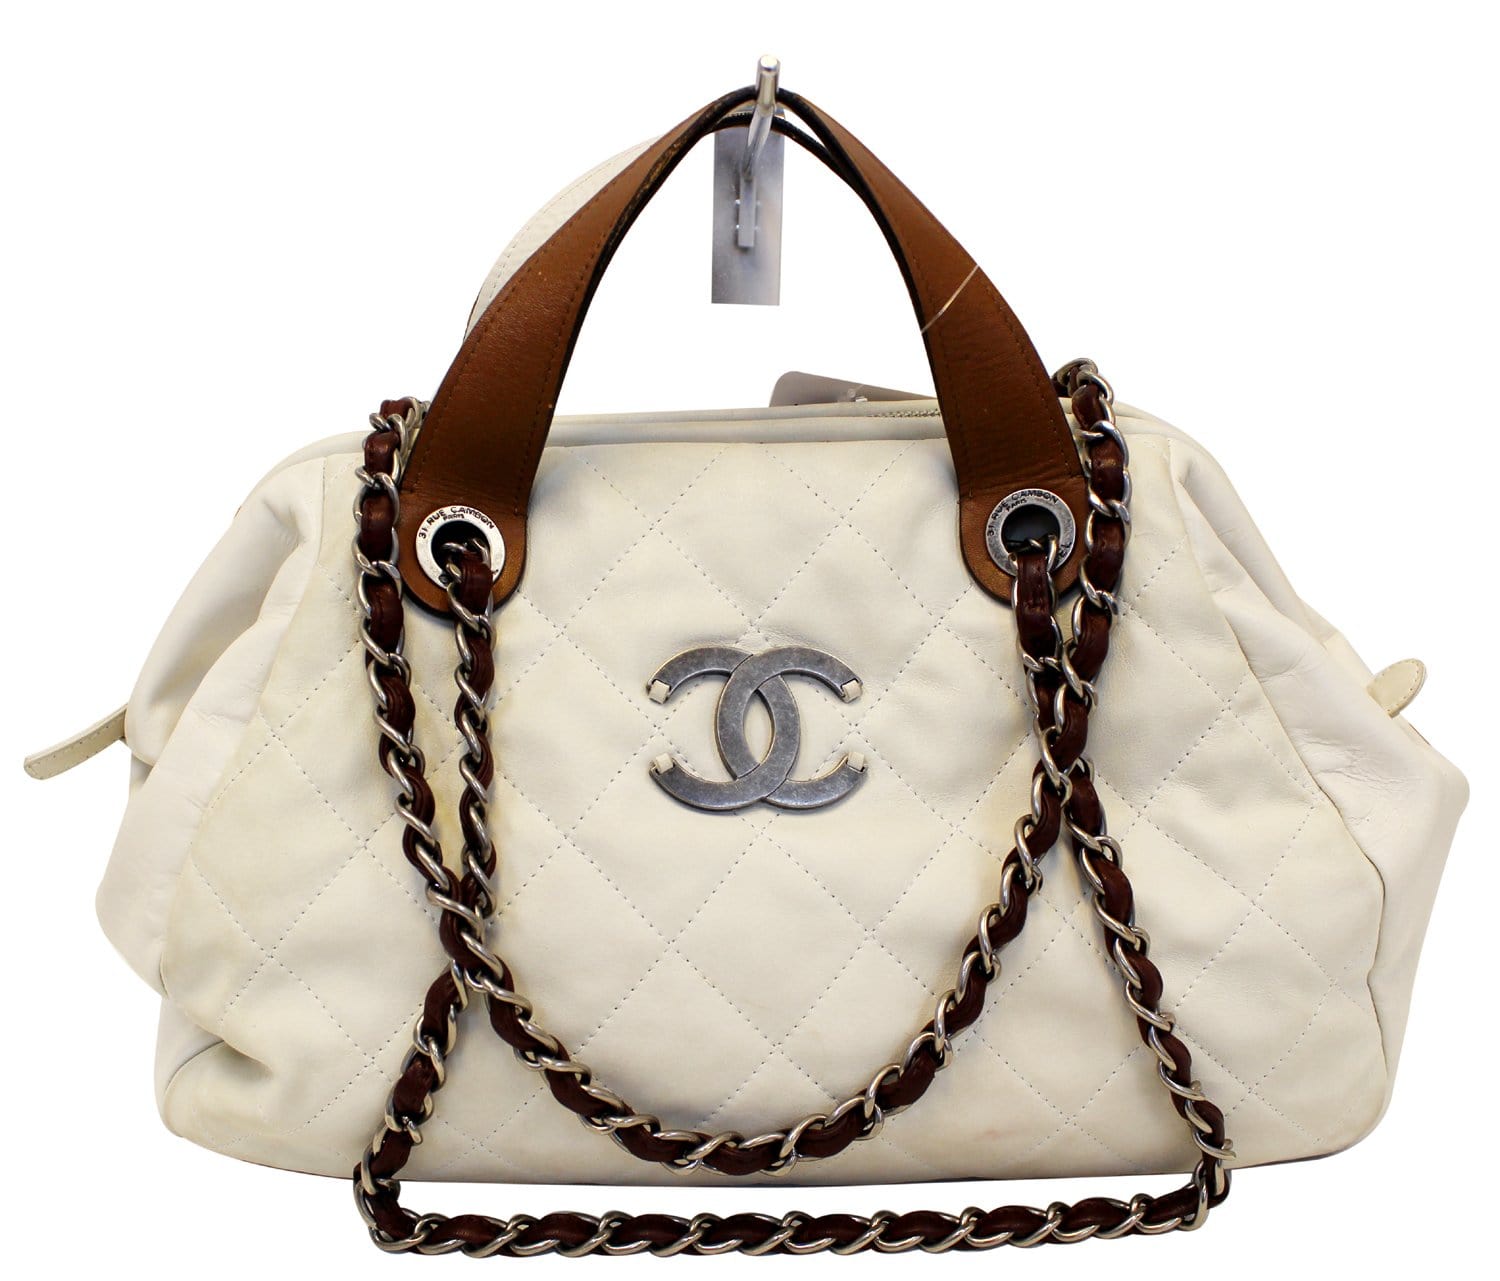 CHANEL Leather Small In-The-Mix White Satchel Bag TT2120